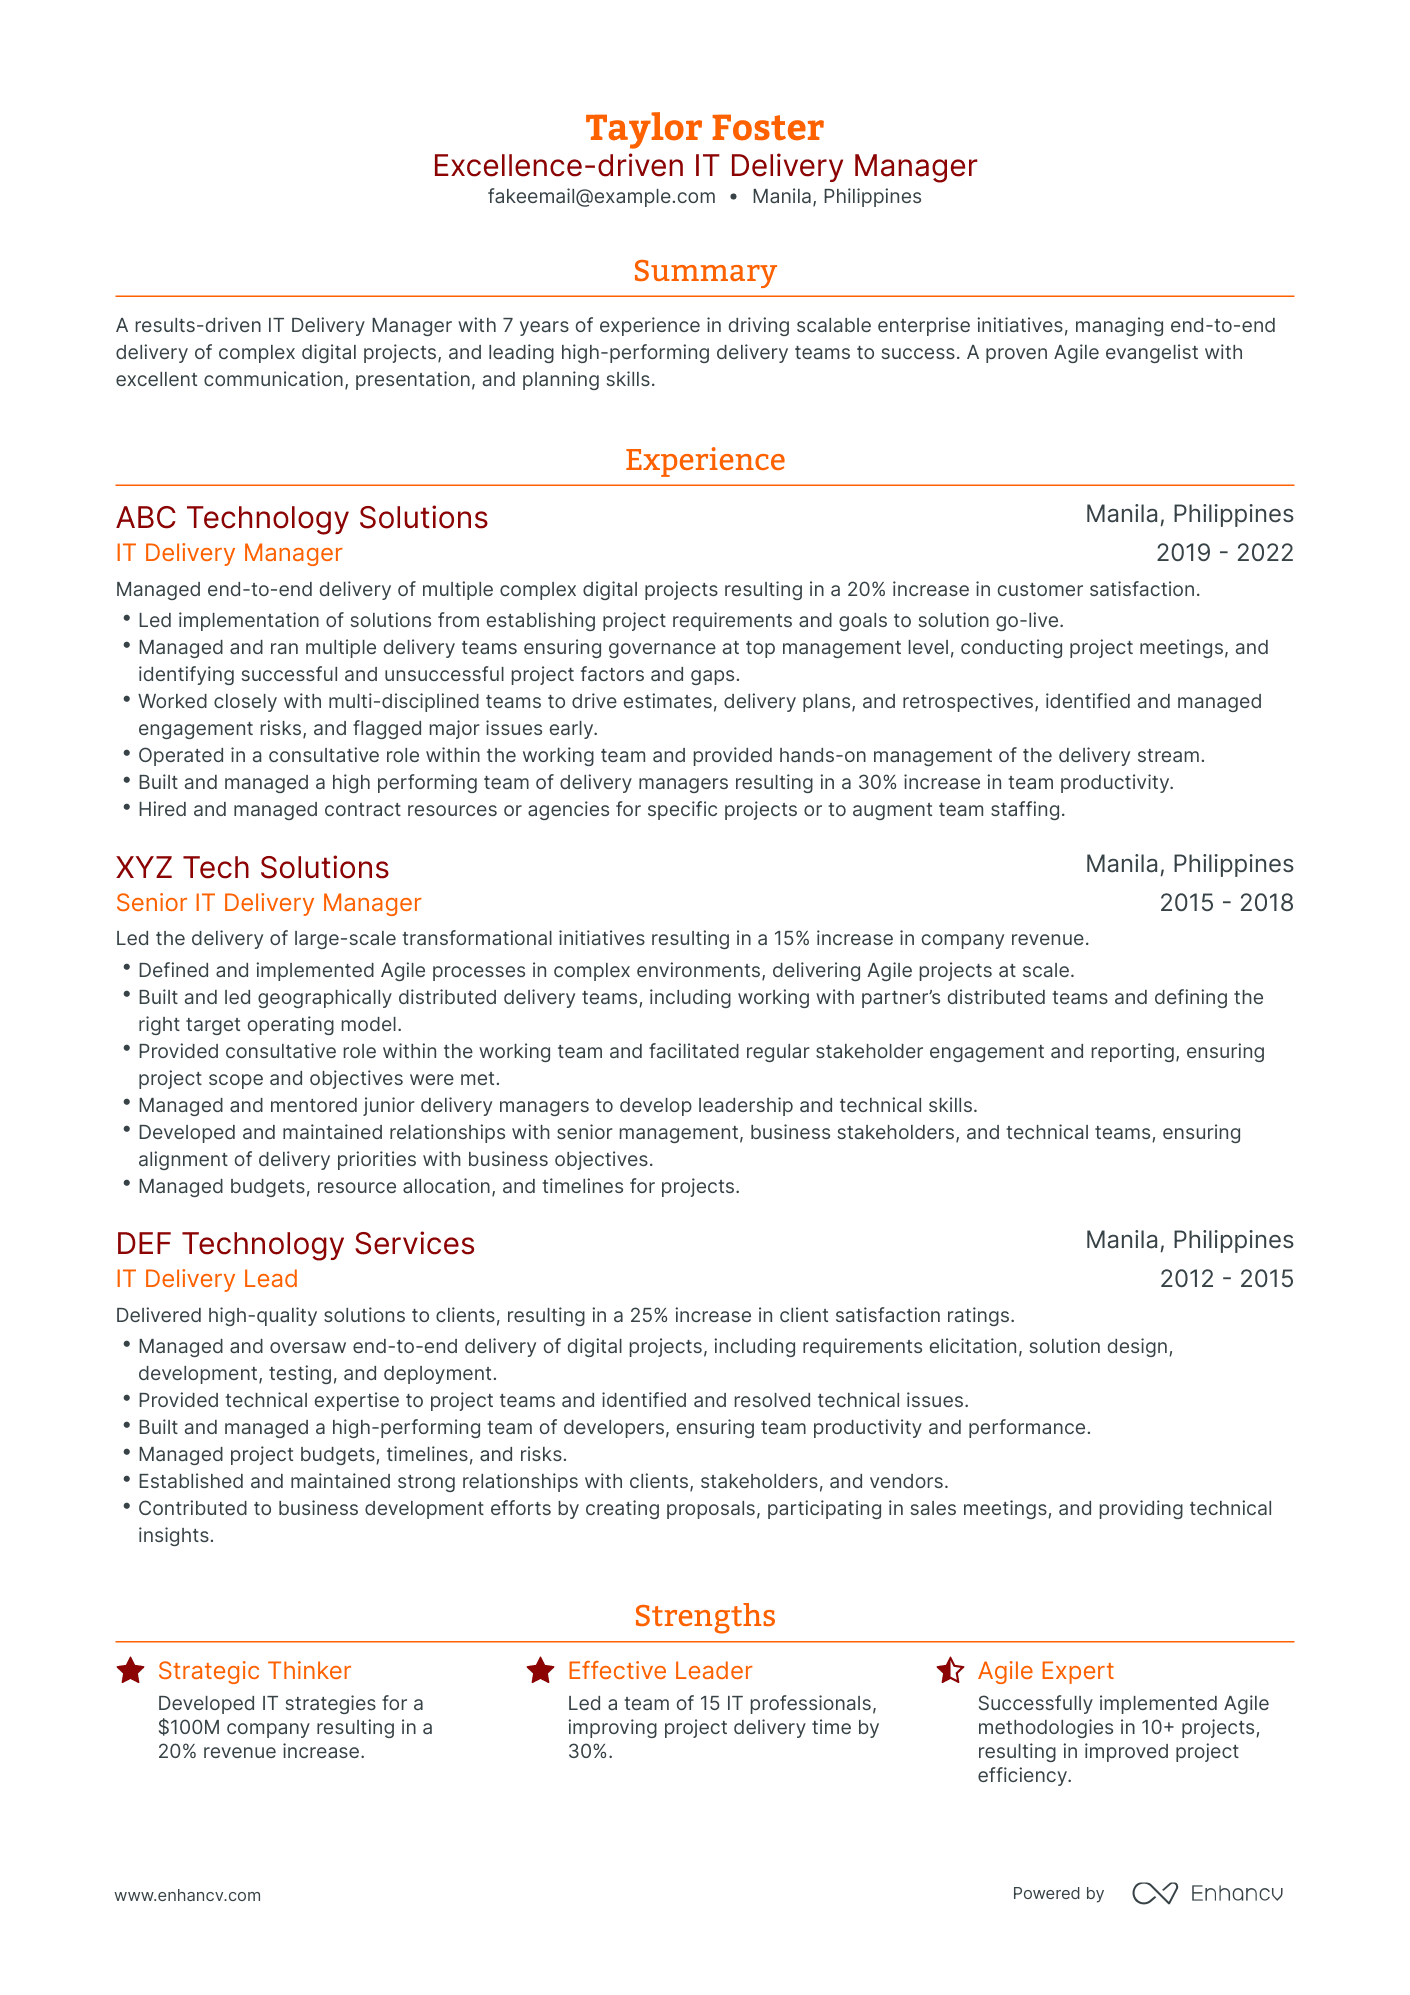 Traditional IT Delivery Manager Resume Template